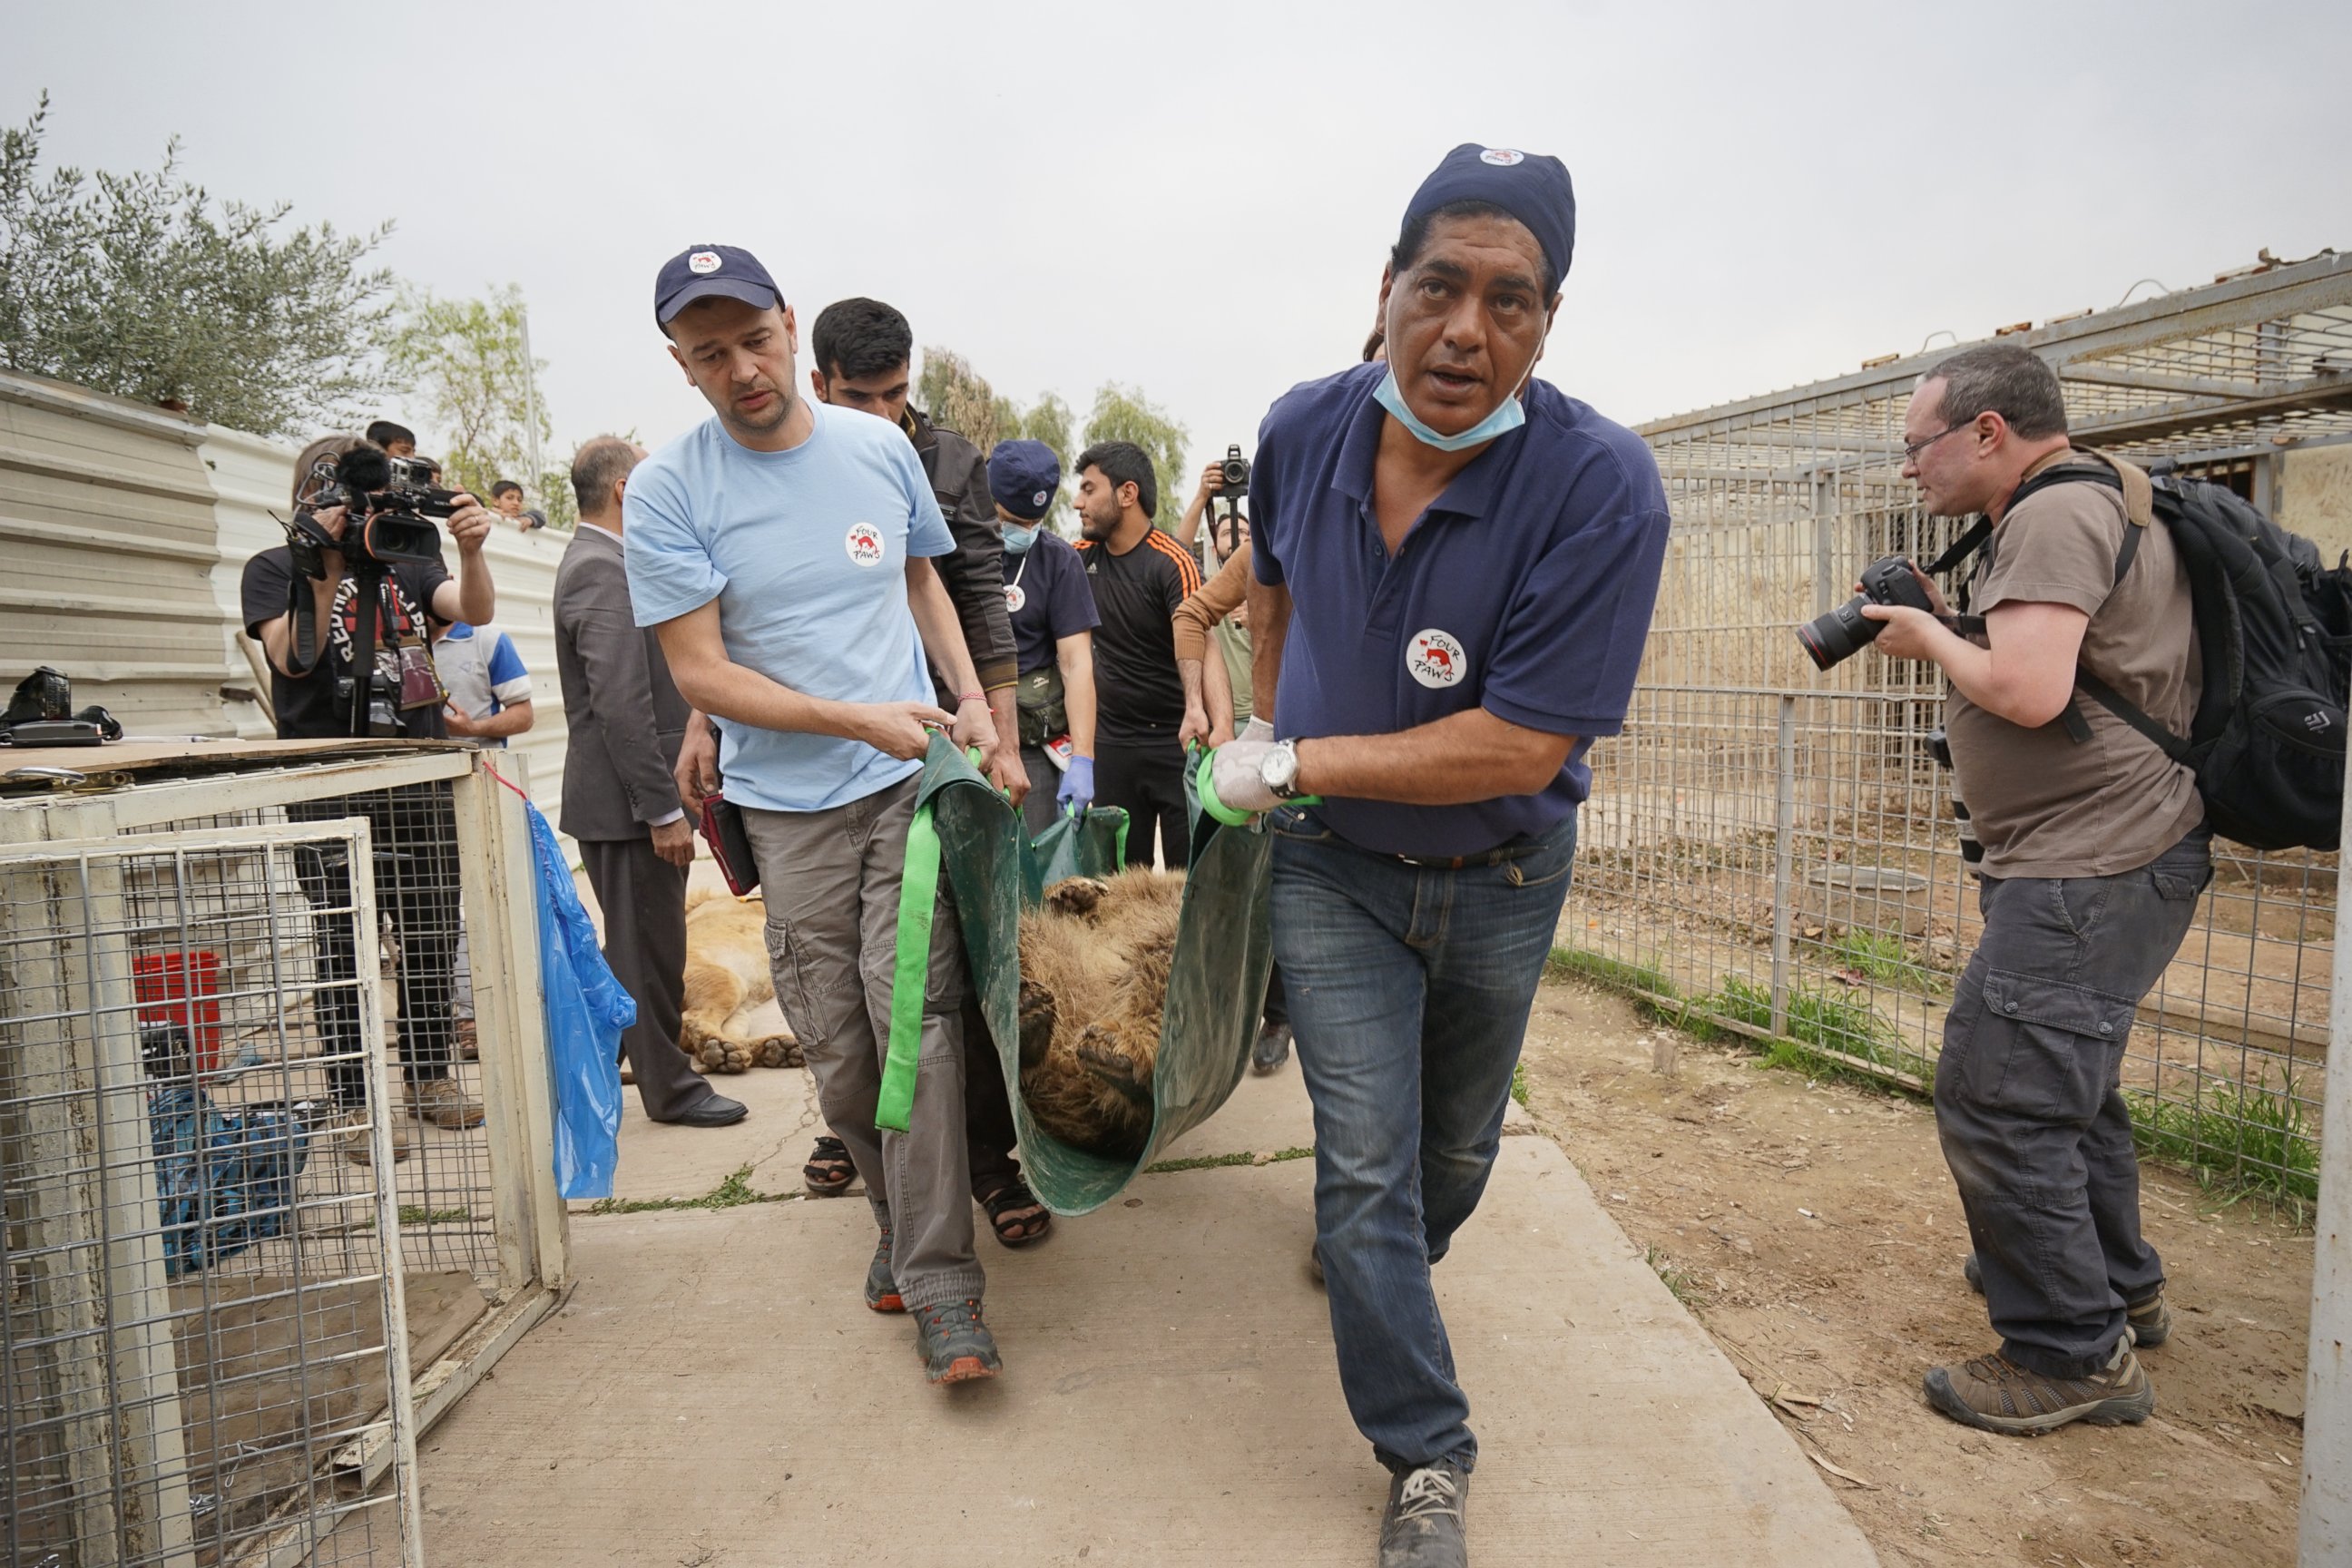 PHOTO: Amir Khalil and Yavor Gechev from the Four Paws rescue mission carry Lula at the Mosul Zoo in Iraq, March 30, 2017.